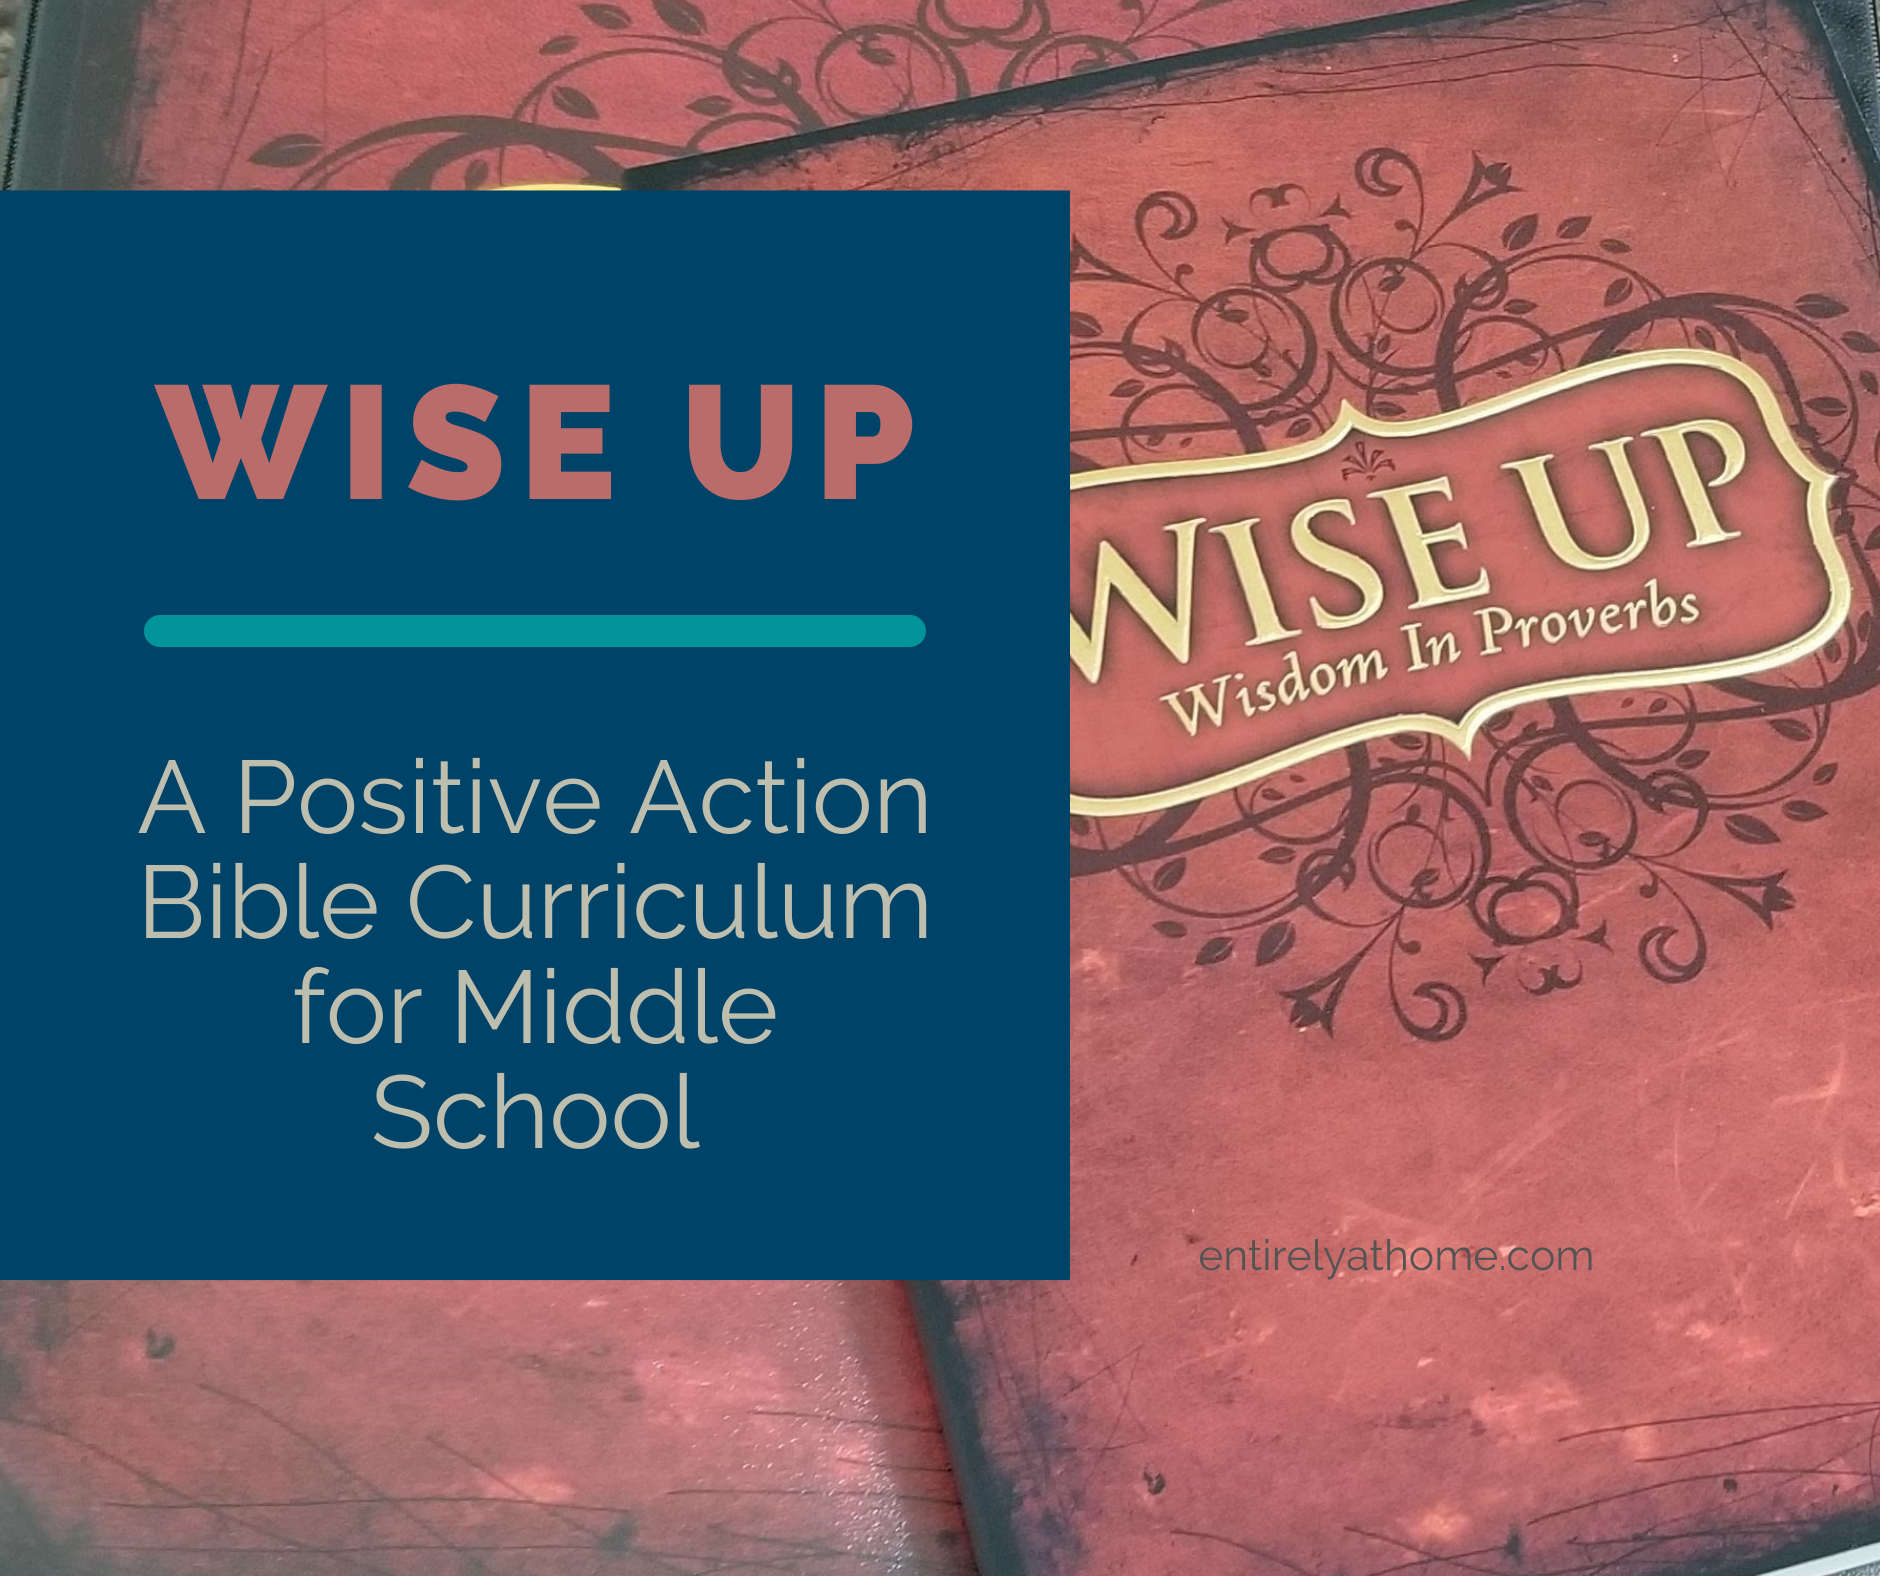 Complimentary Product Received - Positive Action Bible Curriculum Wise up provides an excellent Bible Study for Middle school students Studying Wisdom from God through the book of Proverbs. #hsreviews #biblecurriculum #biblestudy #homeschoolbiblecurriculum #positiveactionforchrist #positiveactionbiblecurriculum